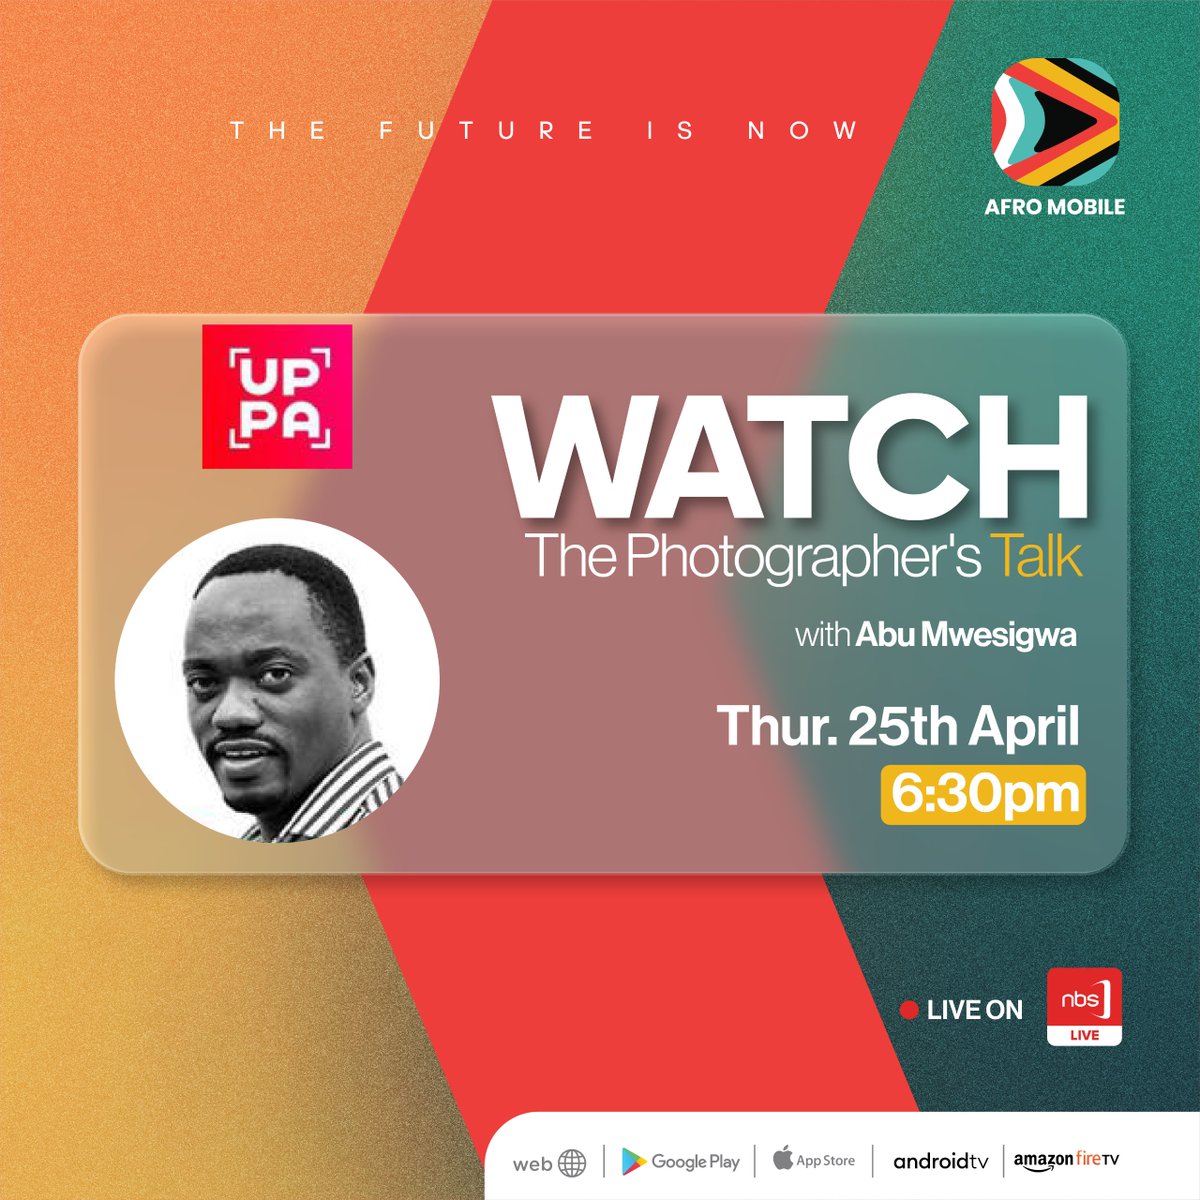 At 6:30pm today, join @AbuMwesigwa at the BushPig Backpackers Hotel to explore his journey in photojournalism. 
If you can't attend in person, tune in live on @afromobileug to learn more about photography.

#NBSUpdates
#uppa #photojournalism